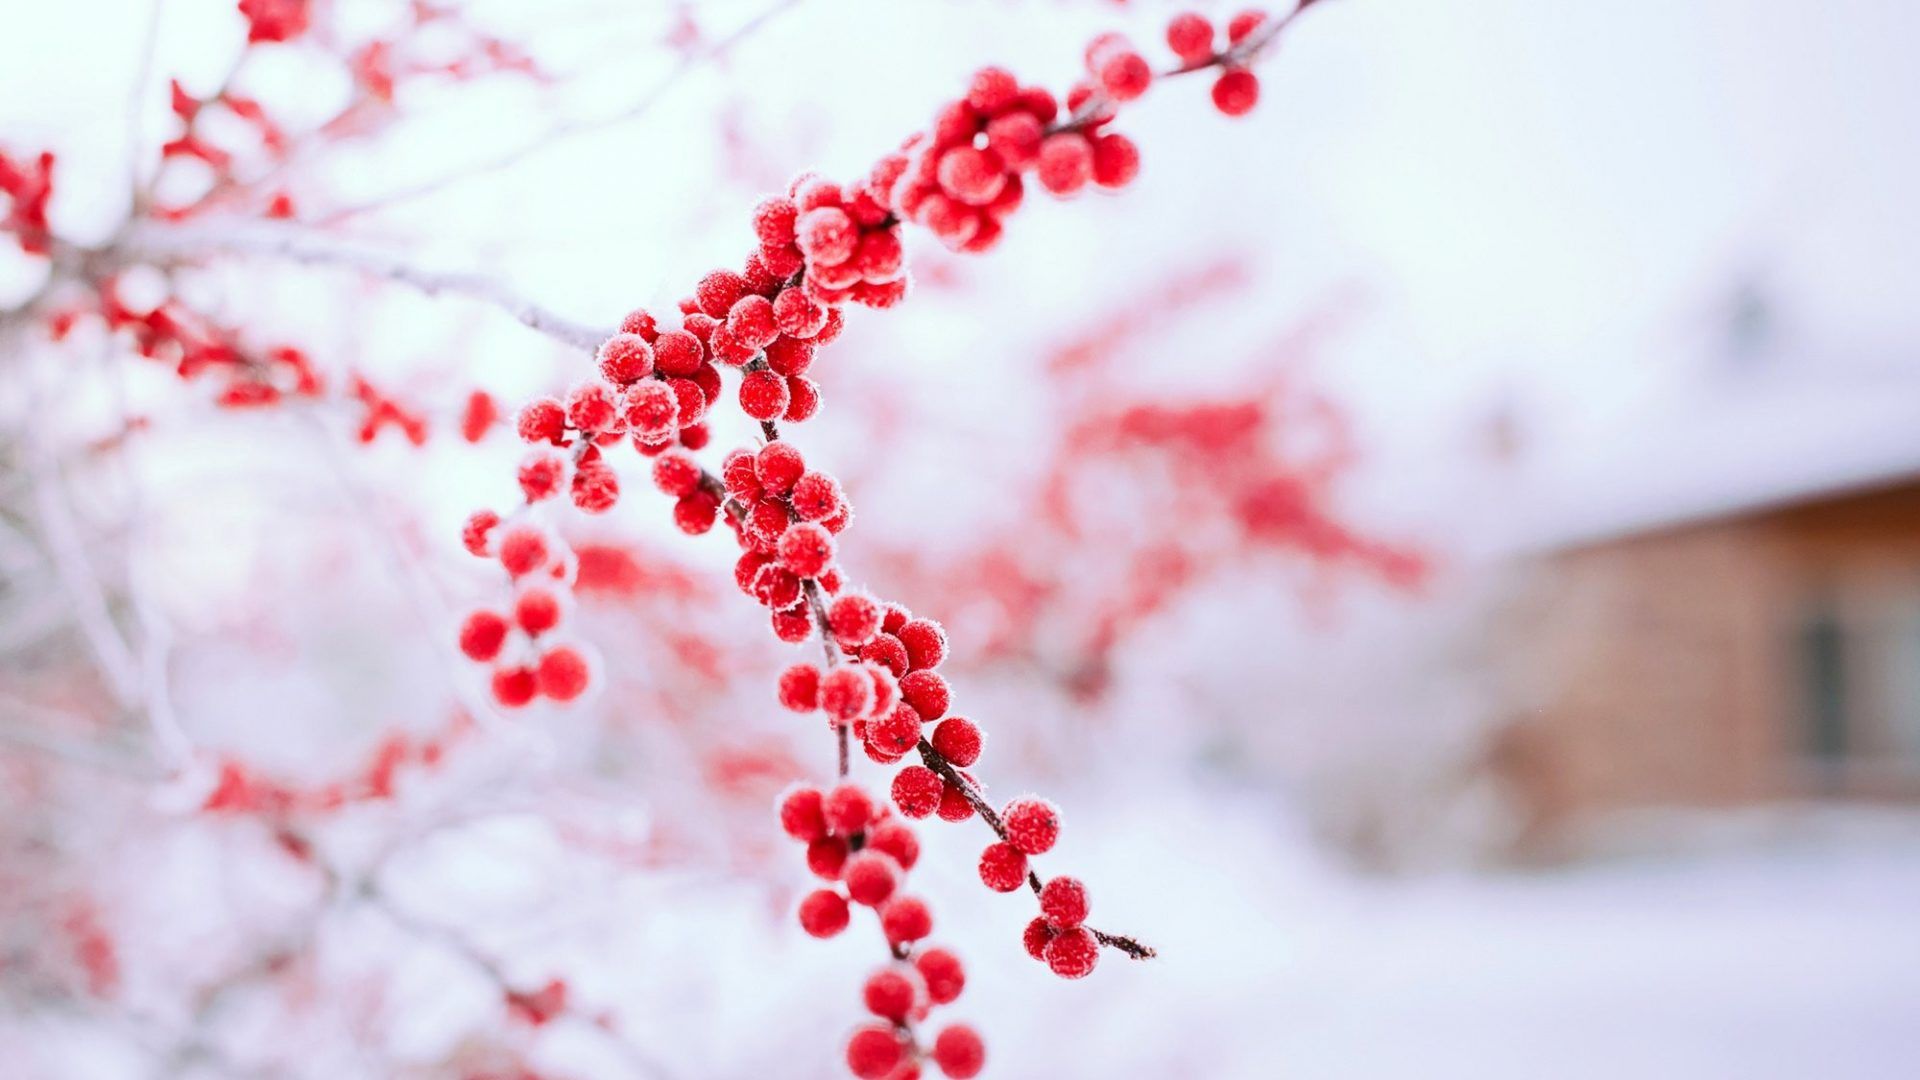 General 1920x1080 snow plants ice outdoors red winter twigs berries